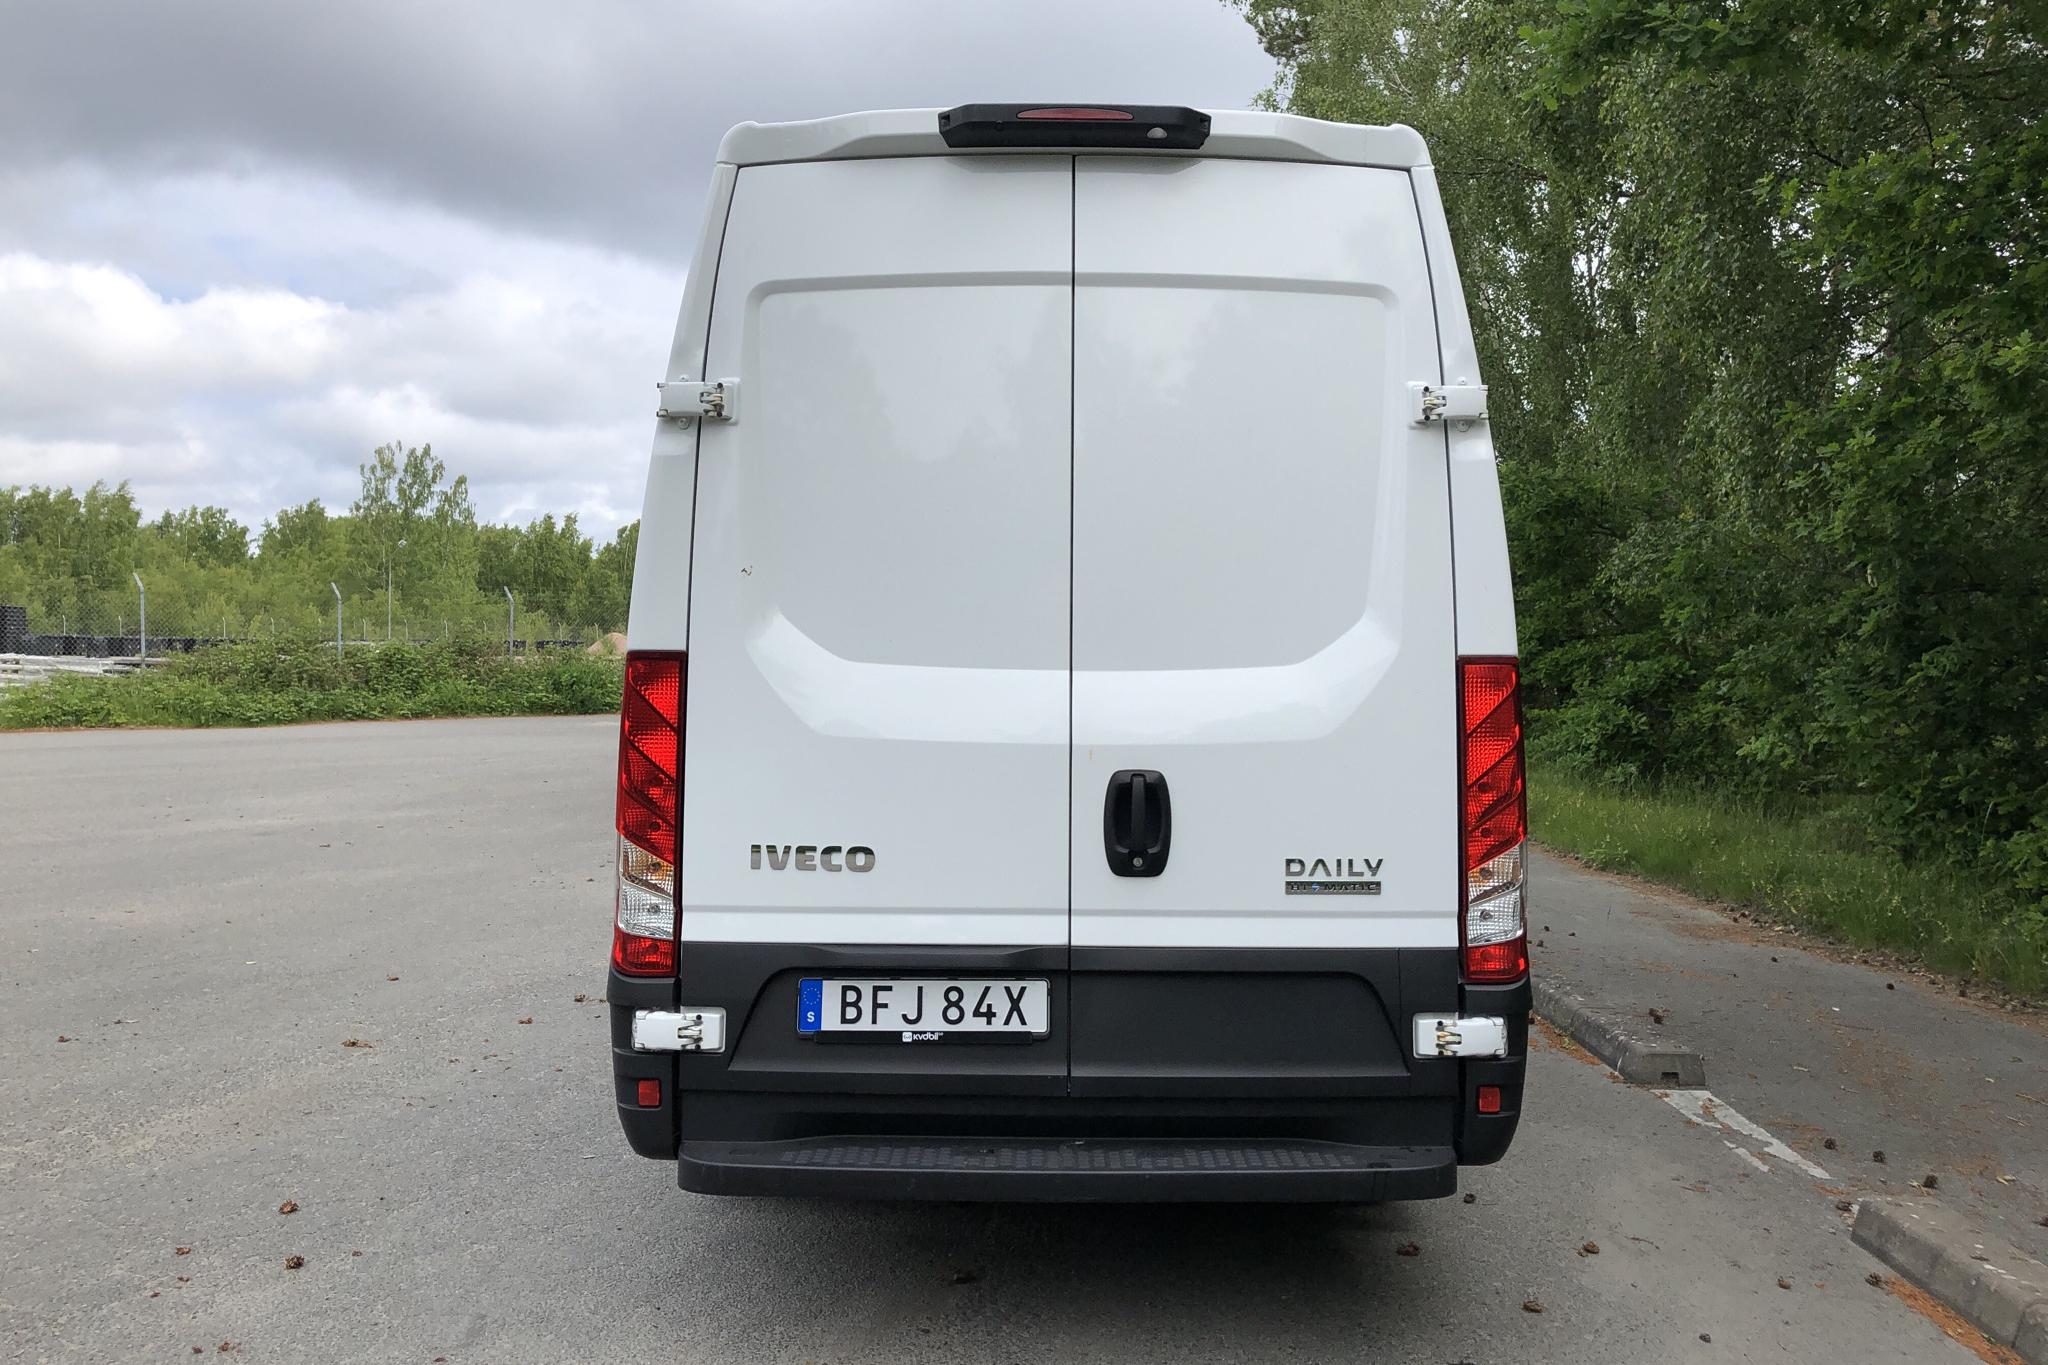 Iveco Daily 35 2.3 (136hk) - 26 970 km - Automatic - white - 2020